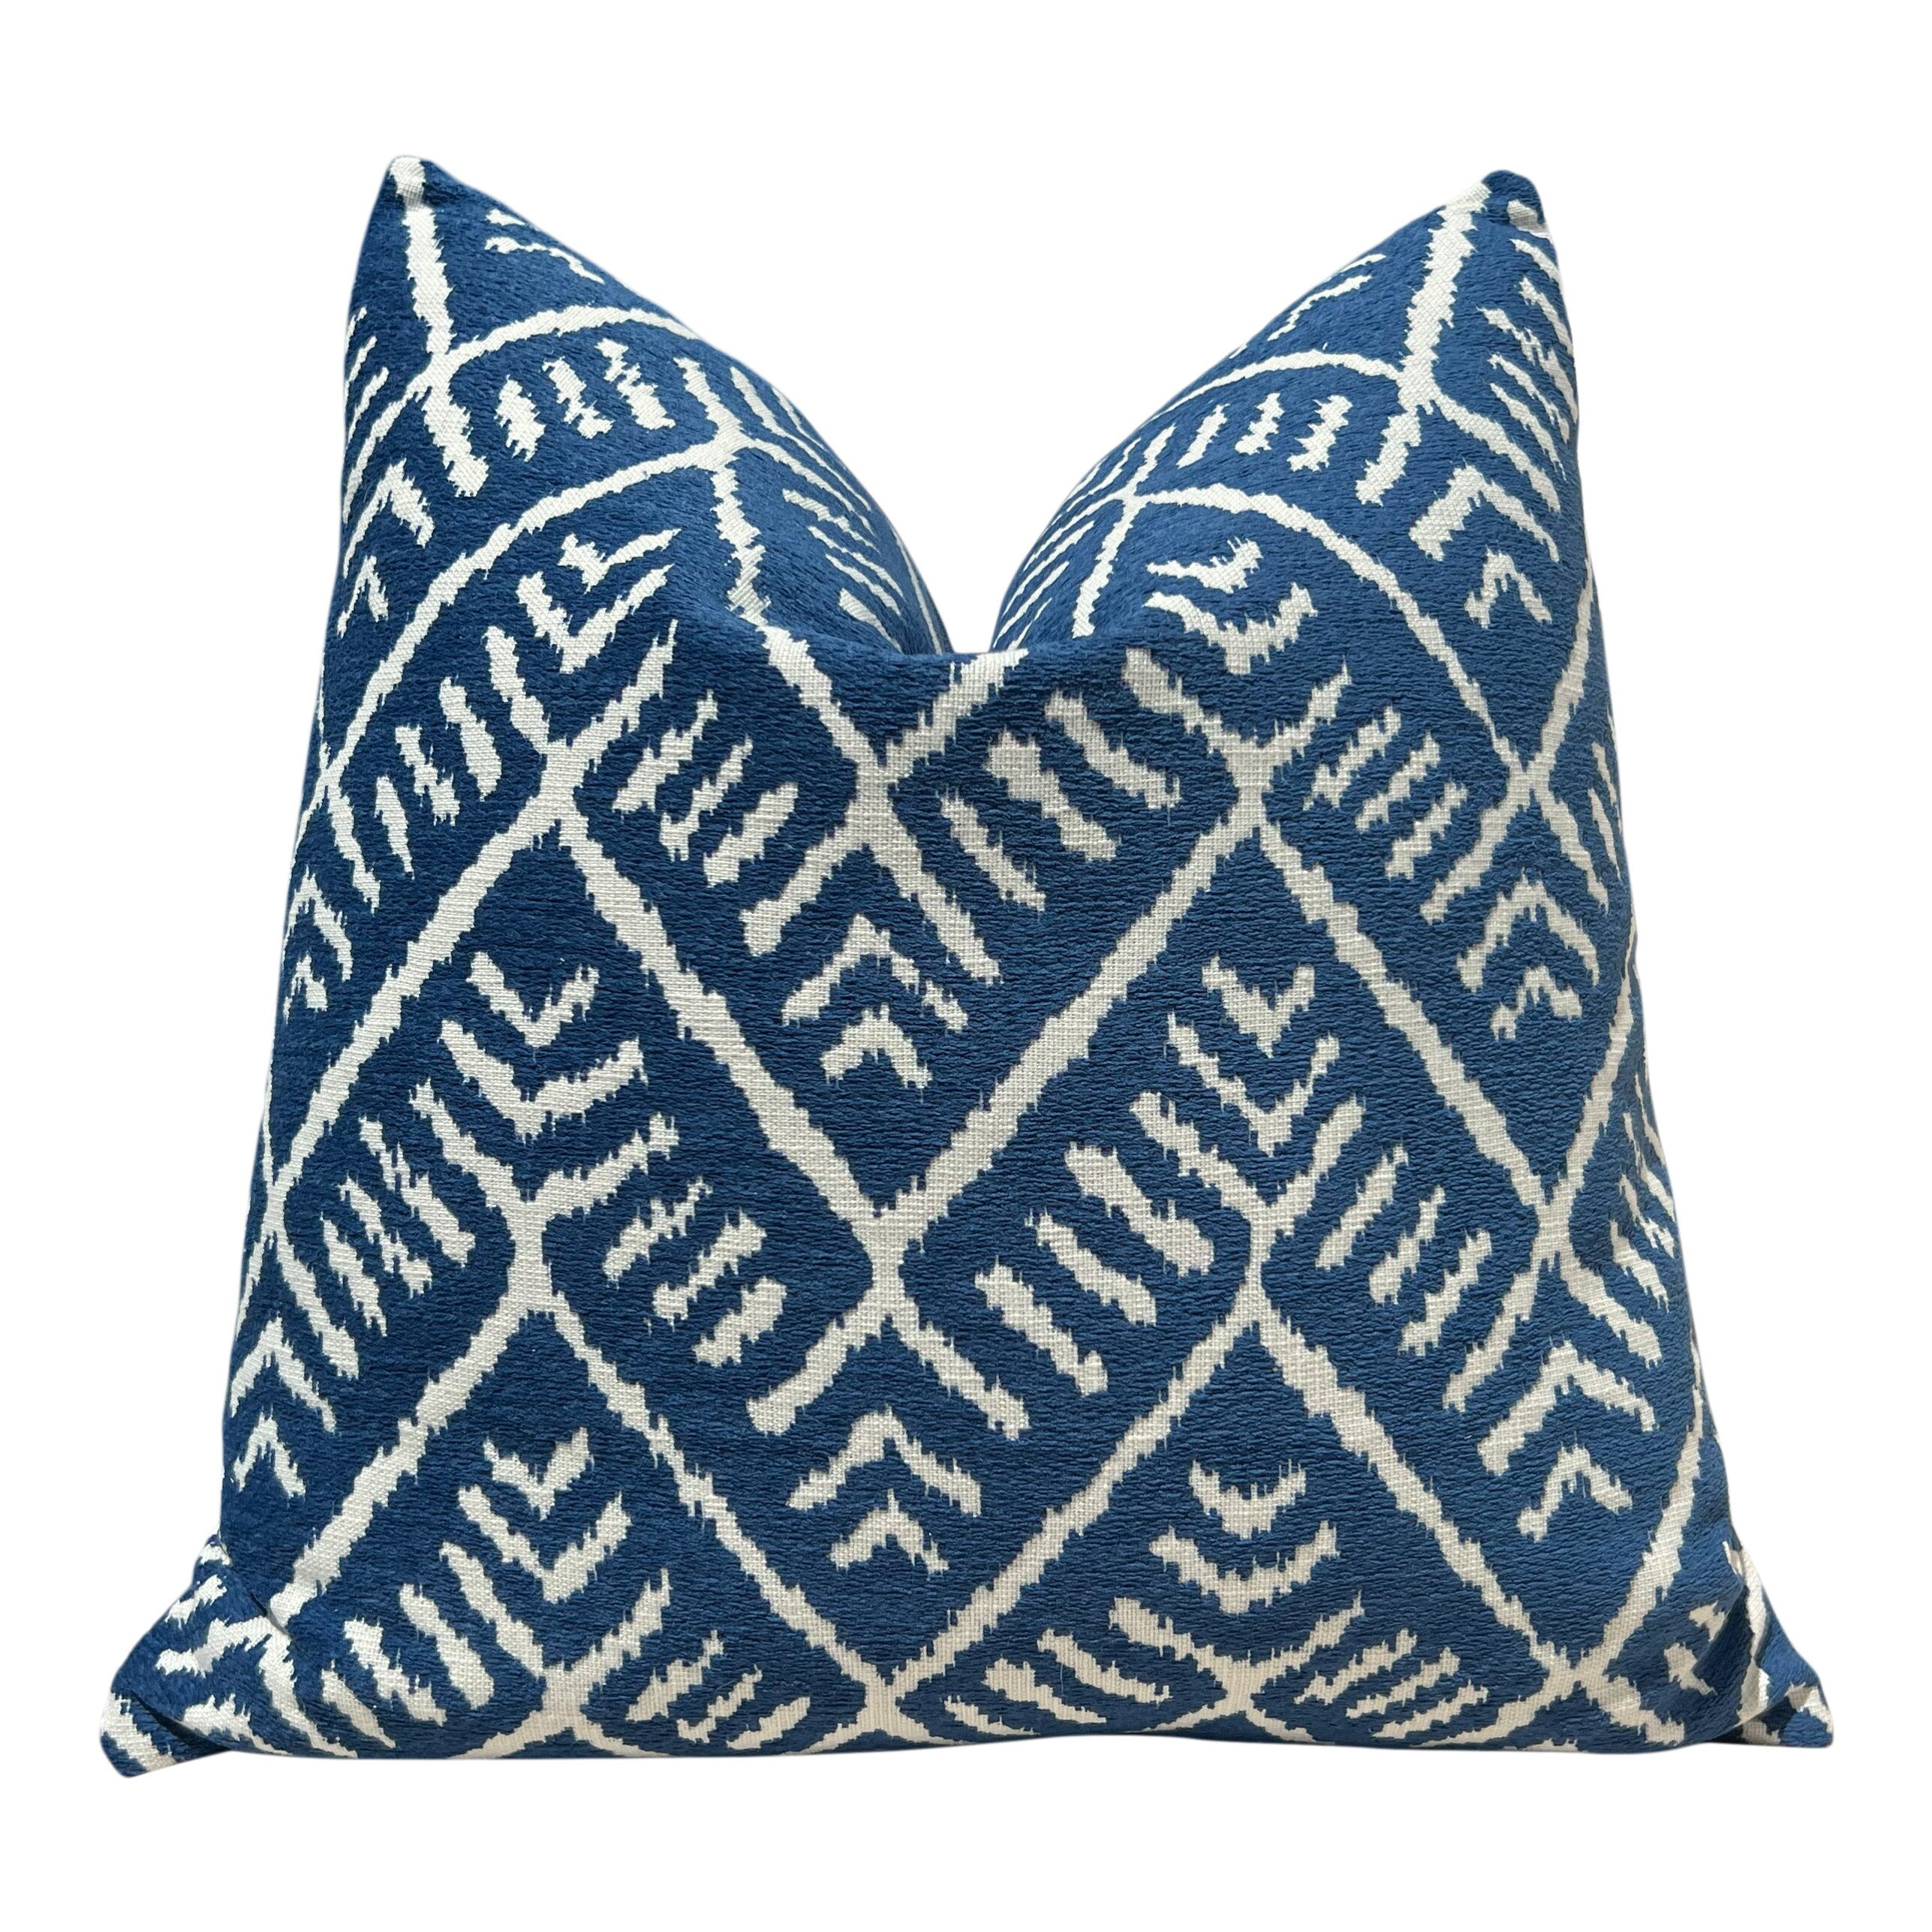 Outdoor Tahoe Geometric Pillow in Denim. Zig Zag Blue Decorative Pillow Cover, Designers Chevron Outdoor Lumbar Pillow in Blue and White,